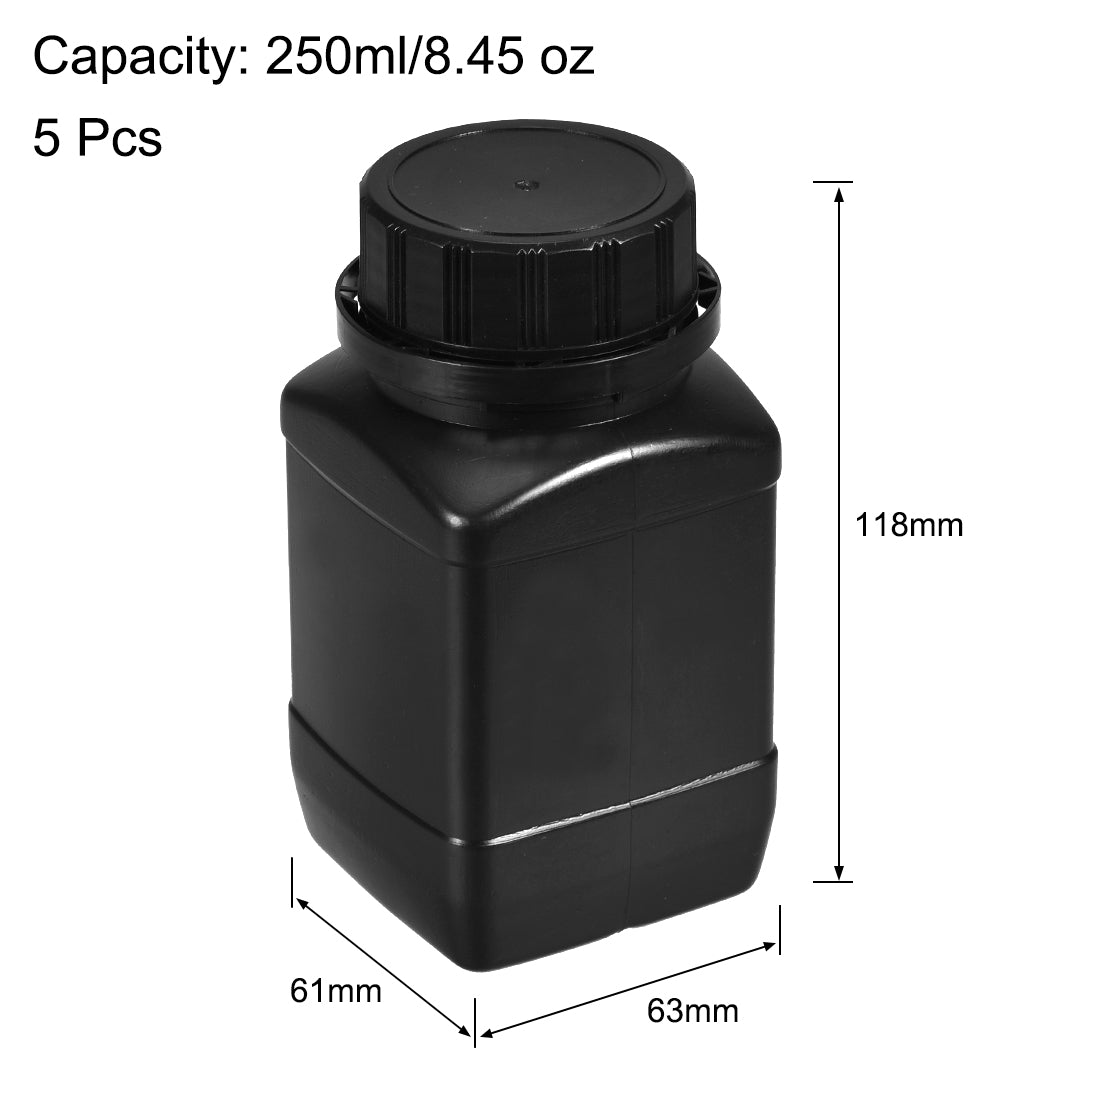 uxcell Uxcell Plastic Lab Chemical Reagent Bottle, 250ml/8.45 oz Wide Mouth Sample Sealing Liquid/Solid Storage Bottles, Black 5pcs